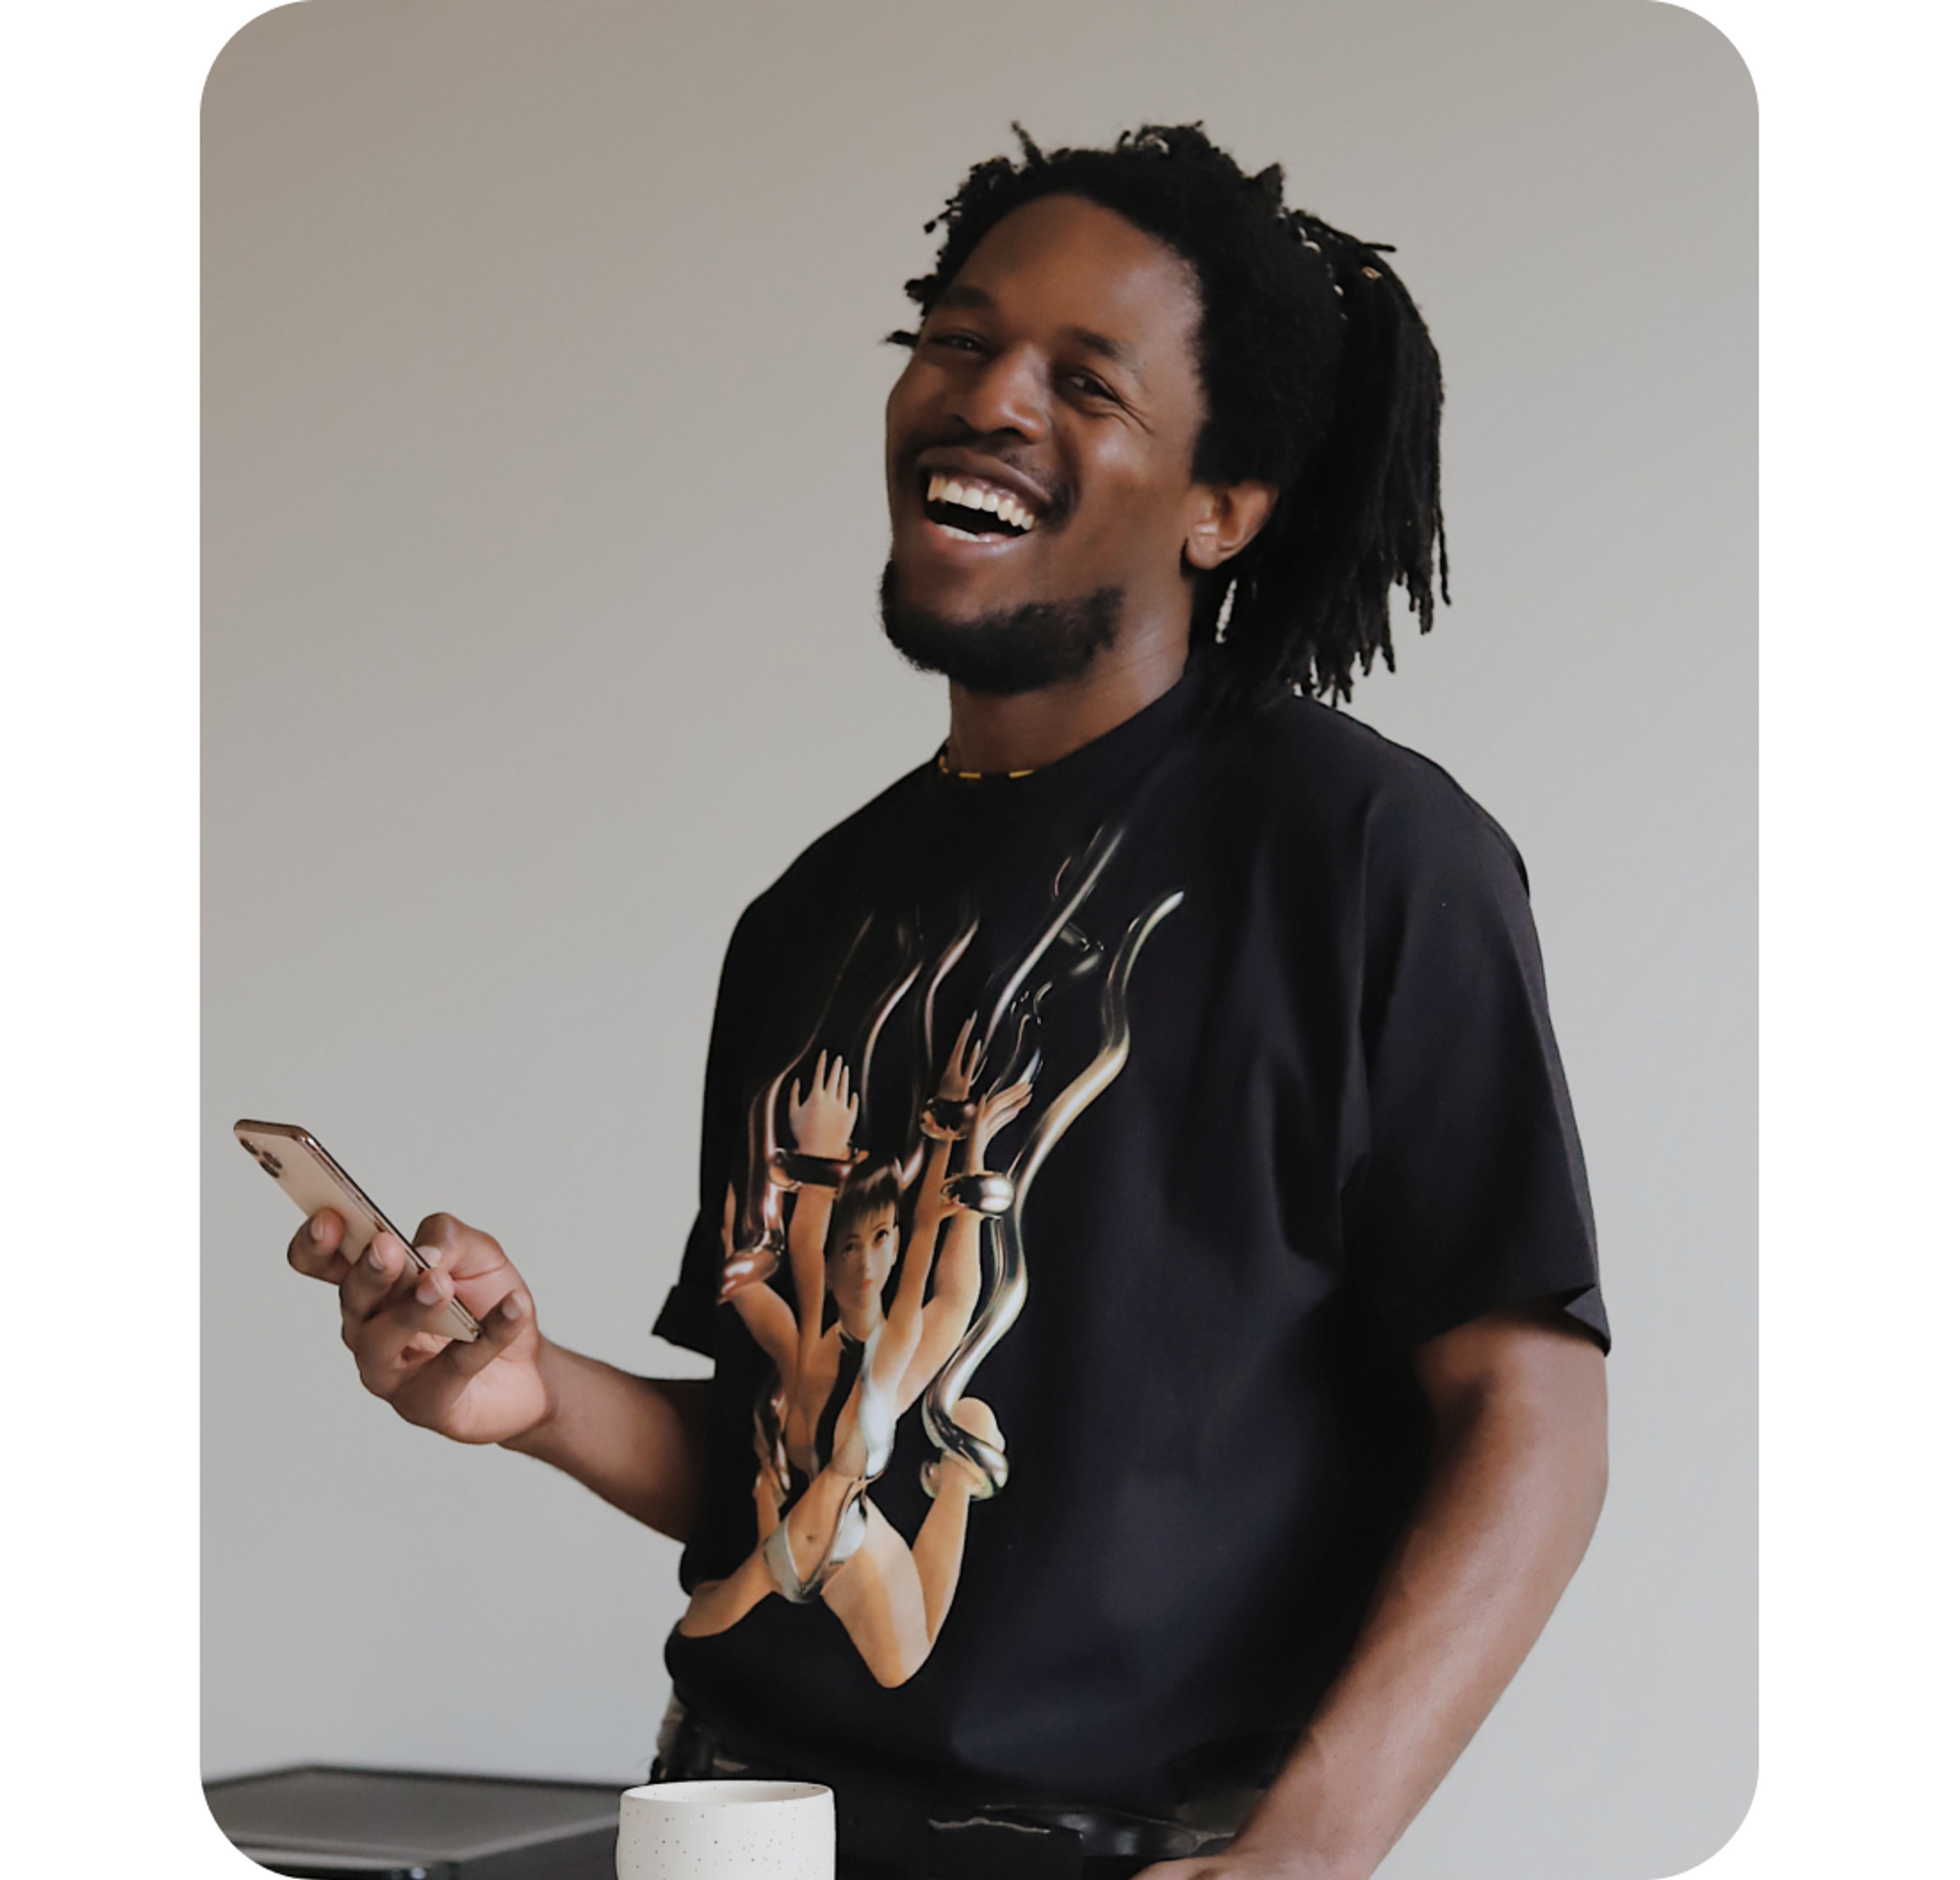 A photo of a man laughing while holding a phone